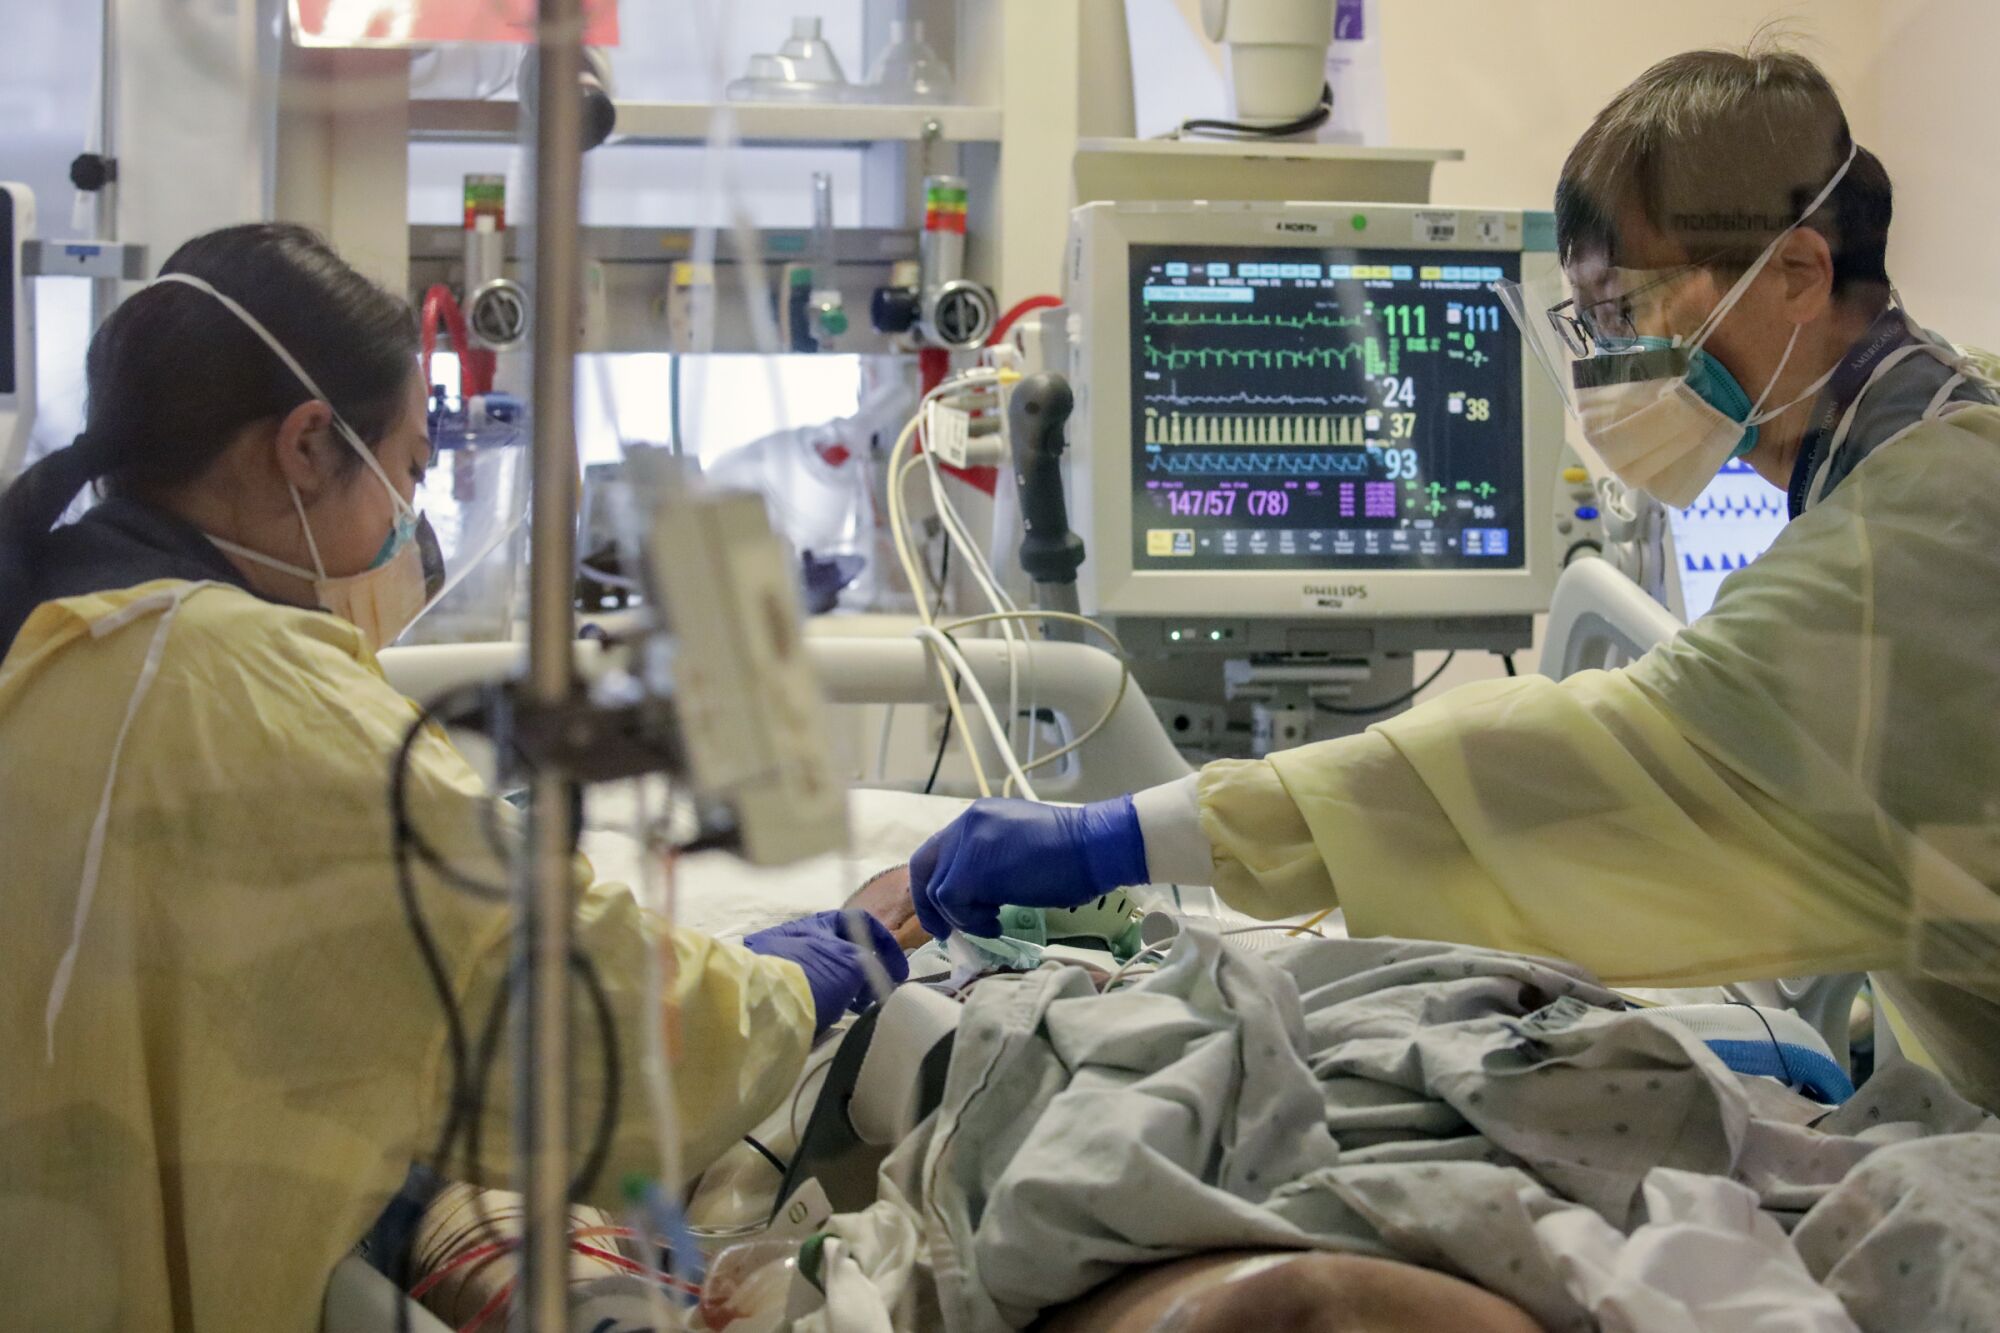 Doctors attend to a COVID patient under treatment in an intensive care unit at Arrowhead Regional Medical Center 